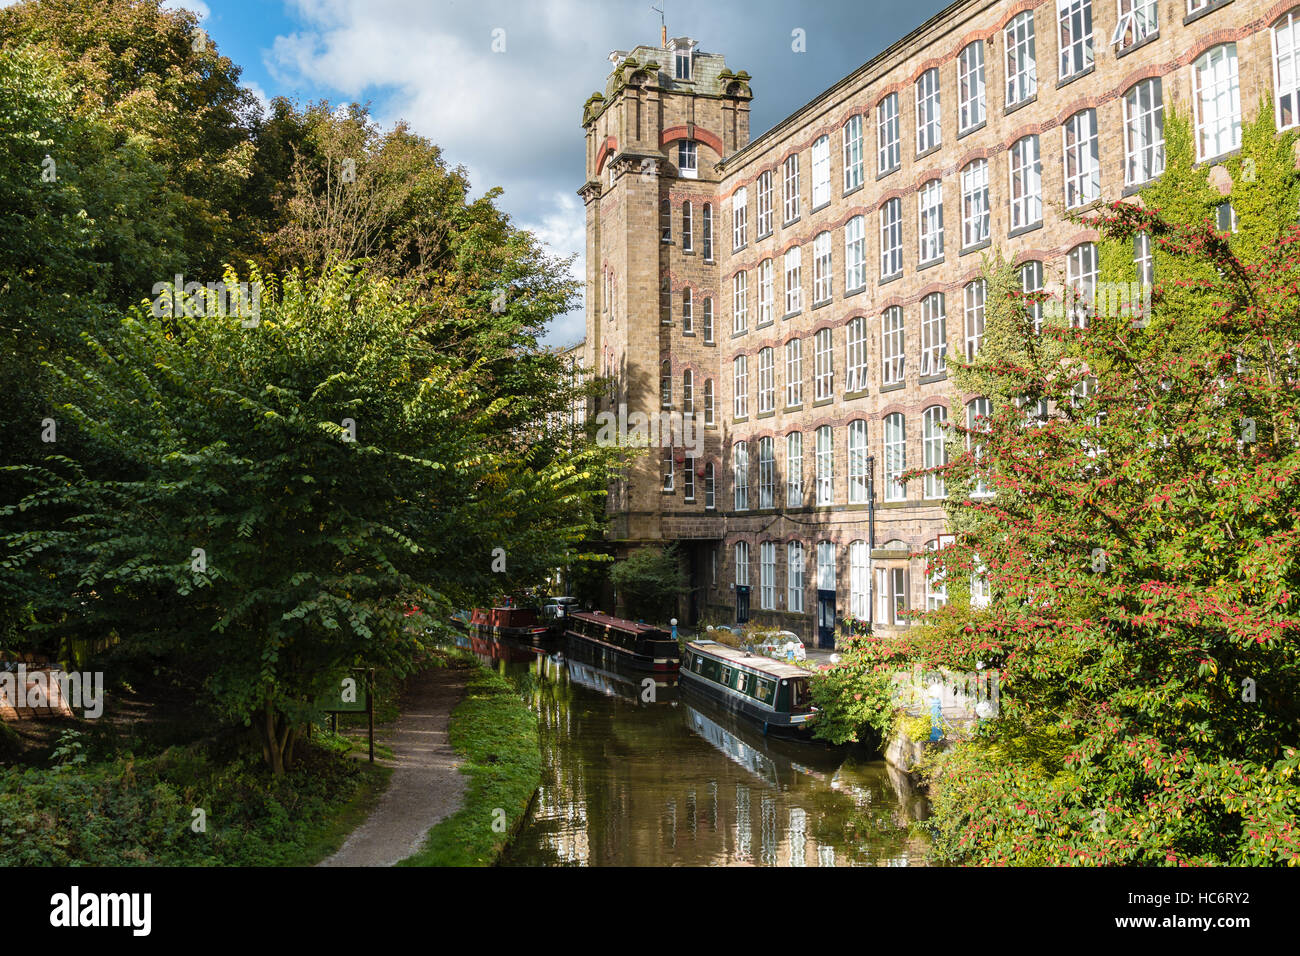 Clarence Mill - an old silk mill - on the banks of the Macclesfield Canal in Bollington Cheshire with moored narrow boats. Stock Photo